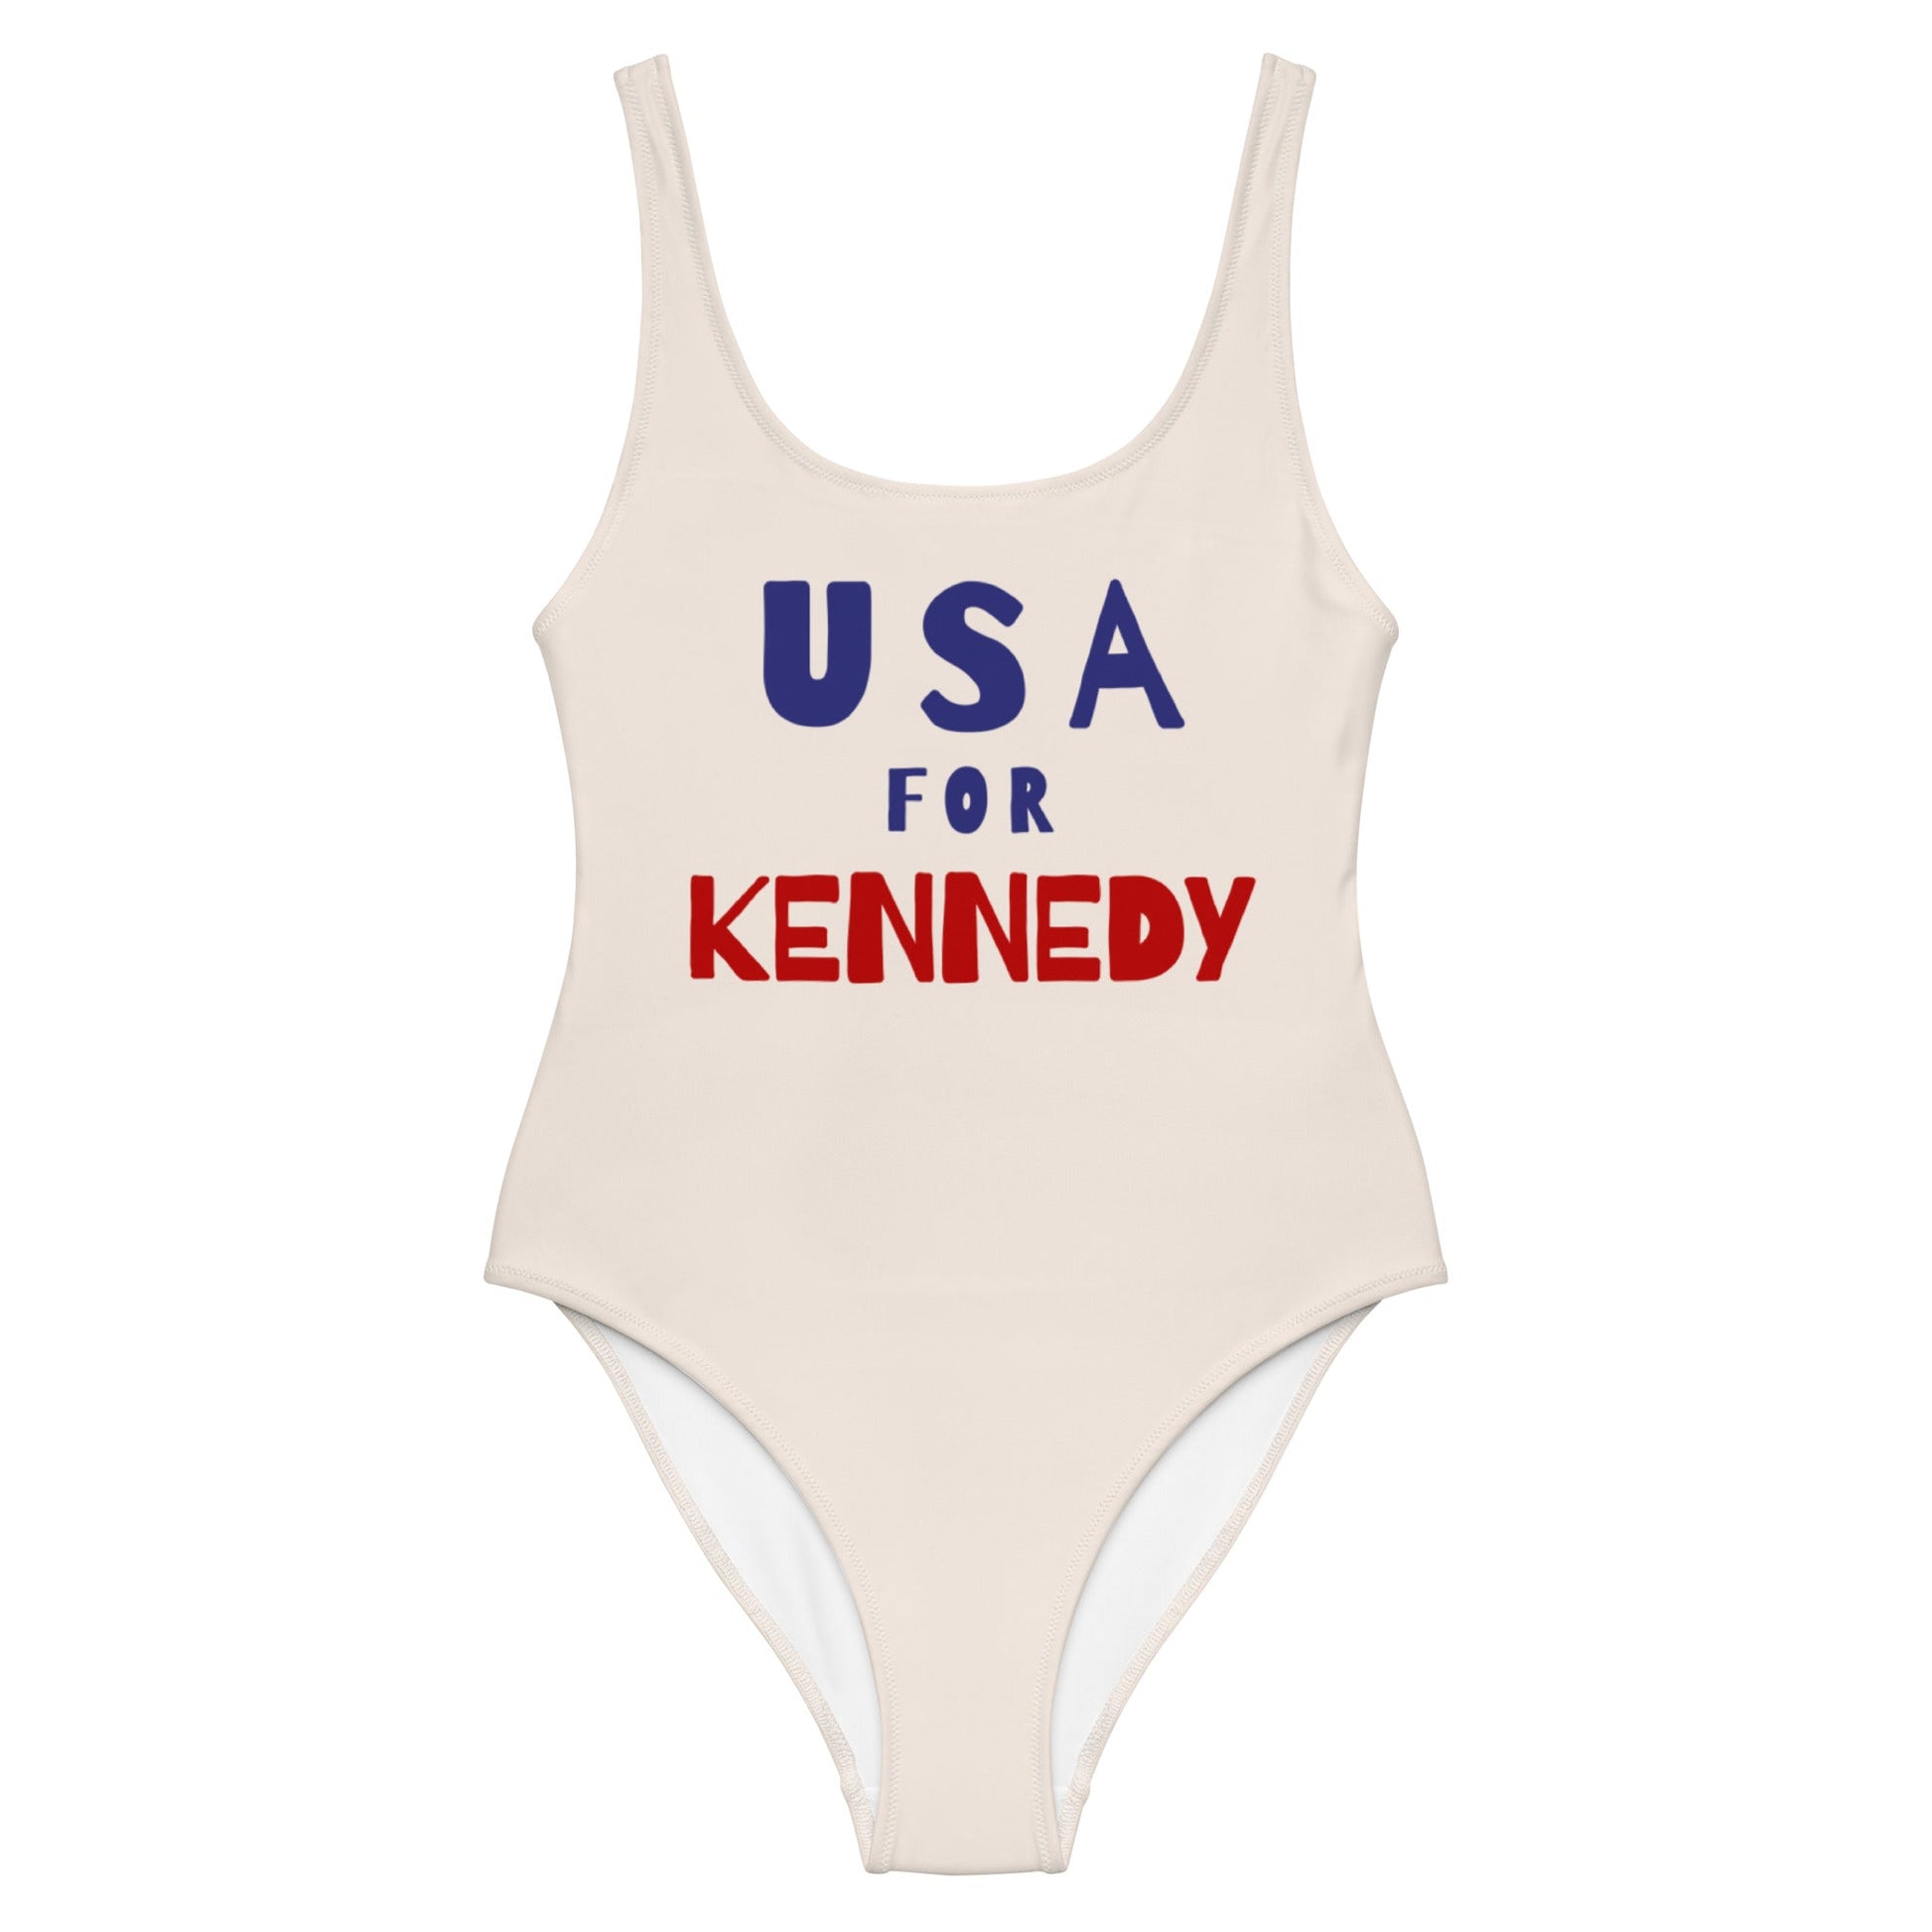 USA for Kennedy One - Piece Swimsuit - TEAM KENNEDY. All rights reserved